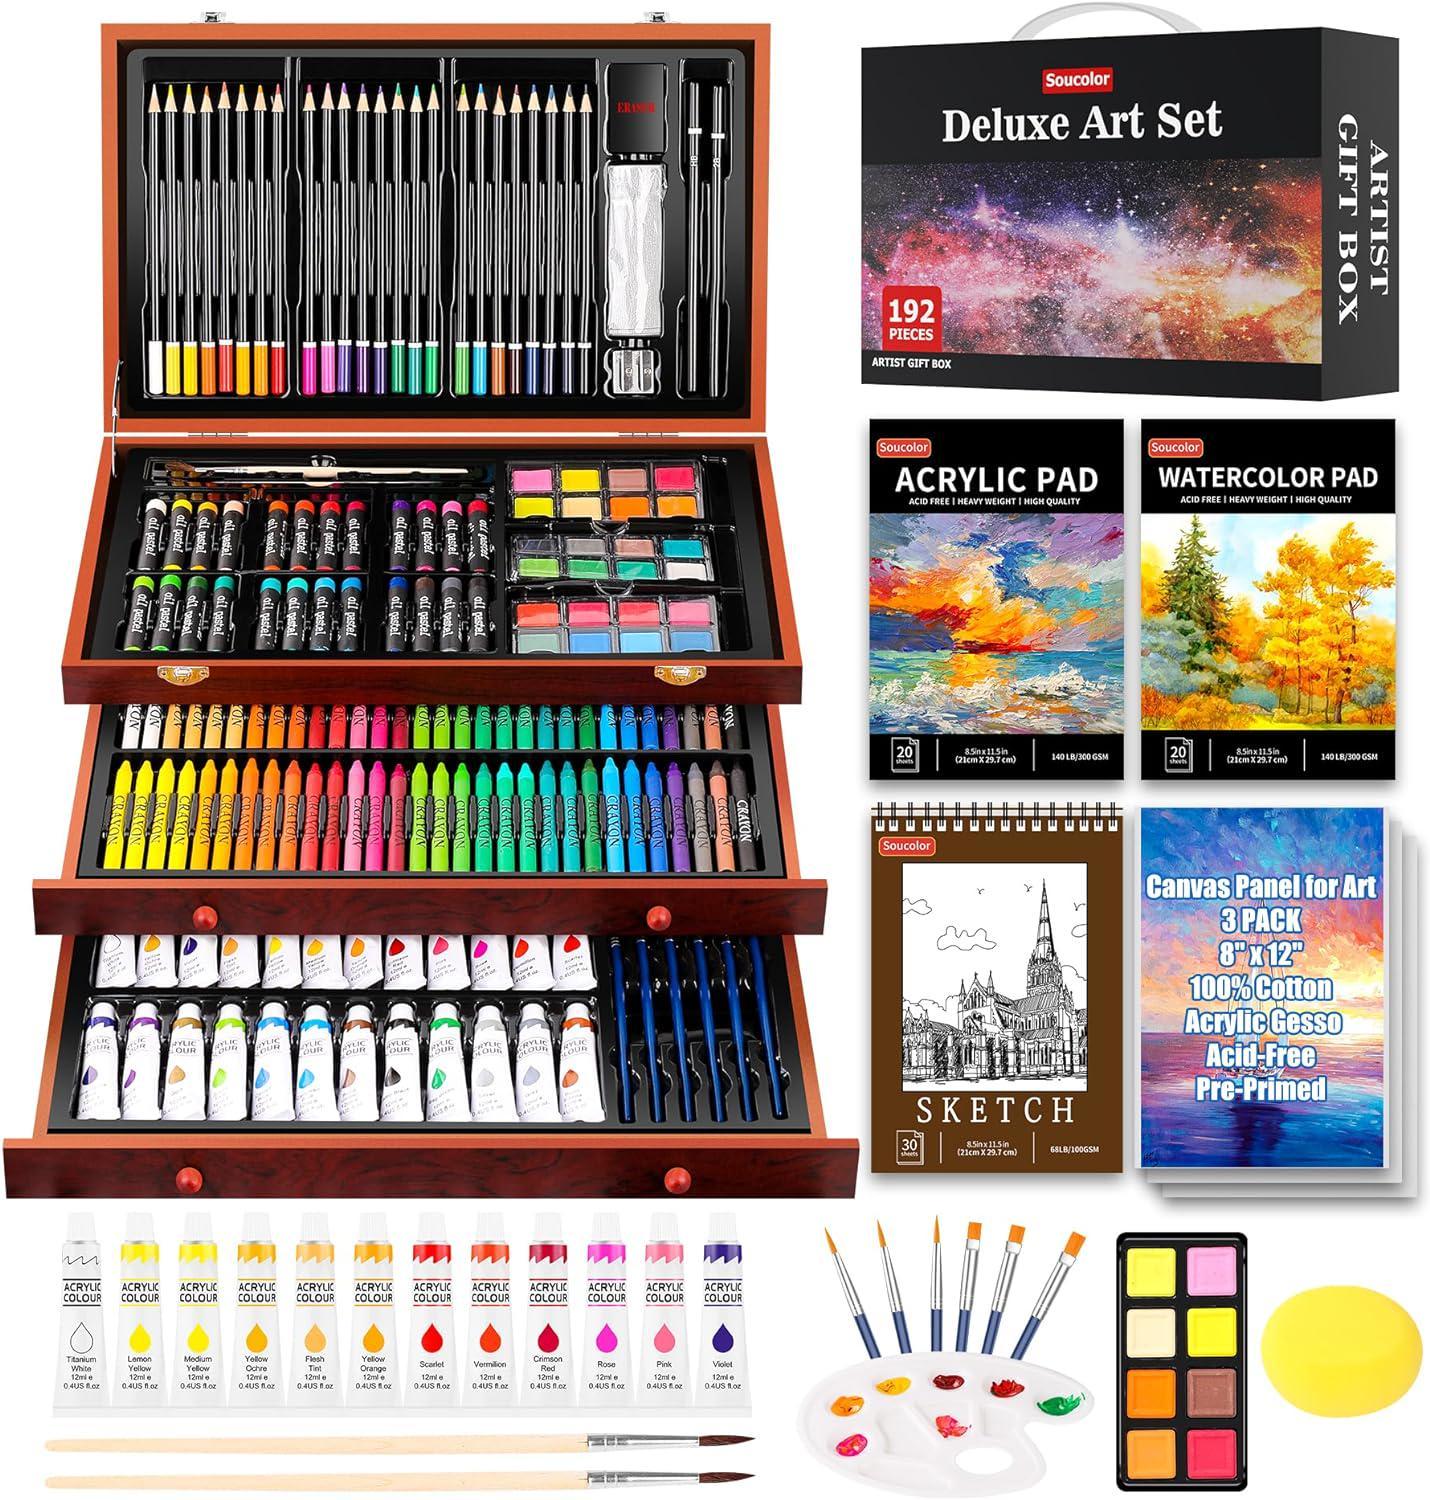 HIFORNY 60 Pcs Drawing Kit Sketching Pencil Set,Sketch Pencils Art Supplies  with 3-Color Sketchbook,Graphite,Charcoal,Drawing Pencils for Adults